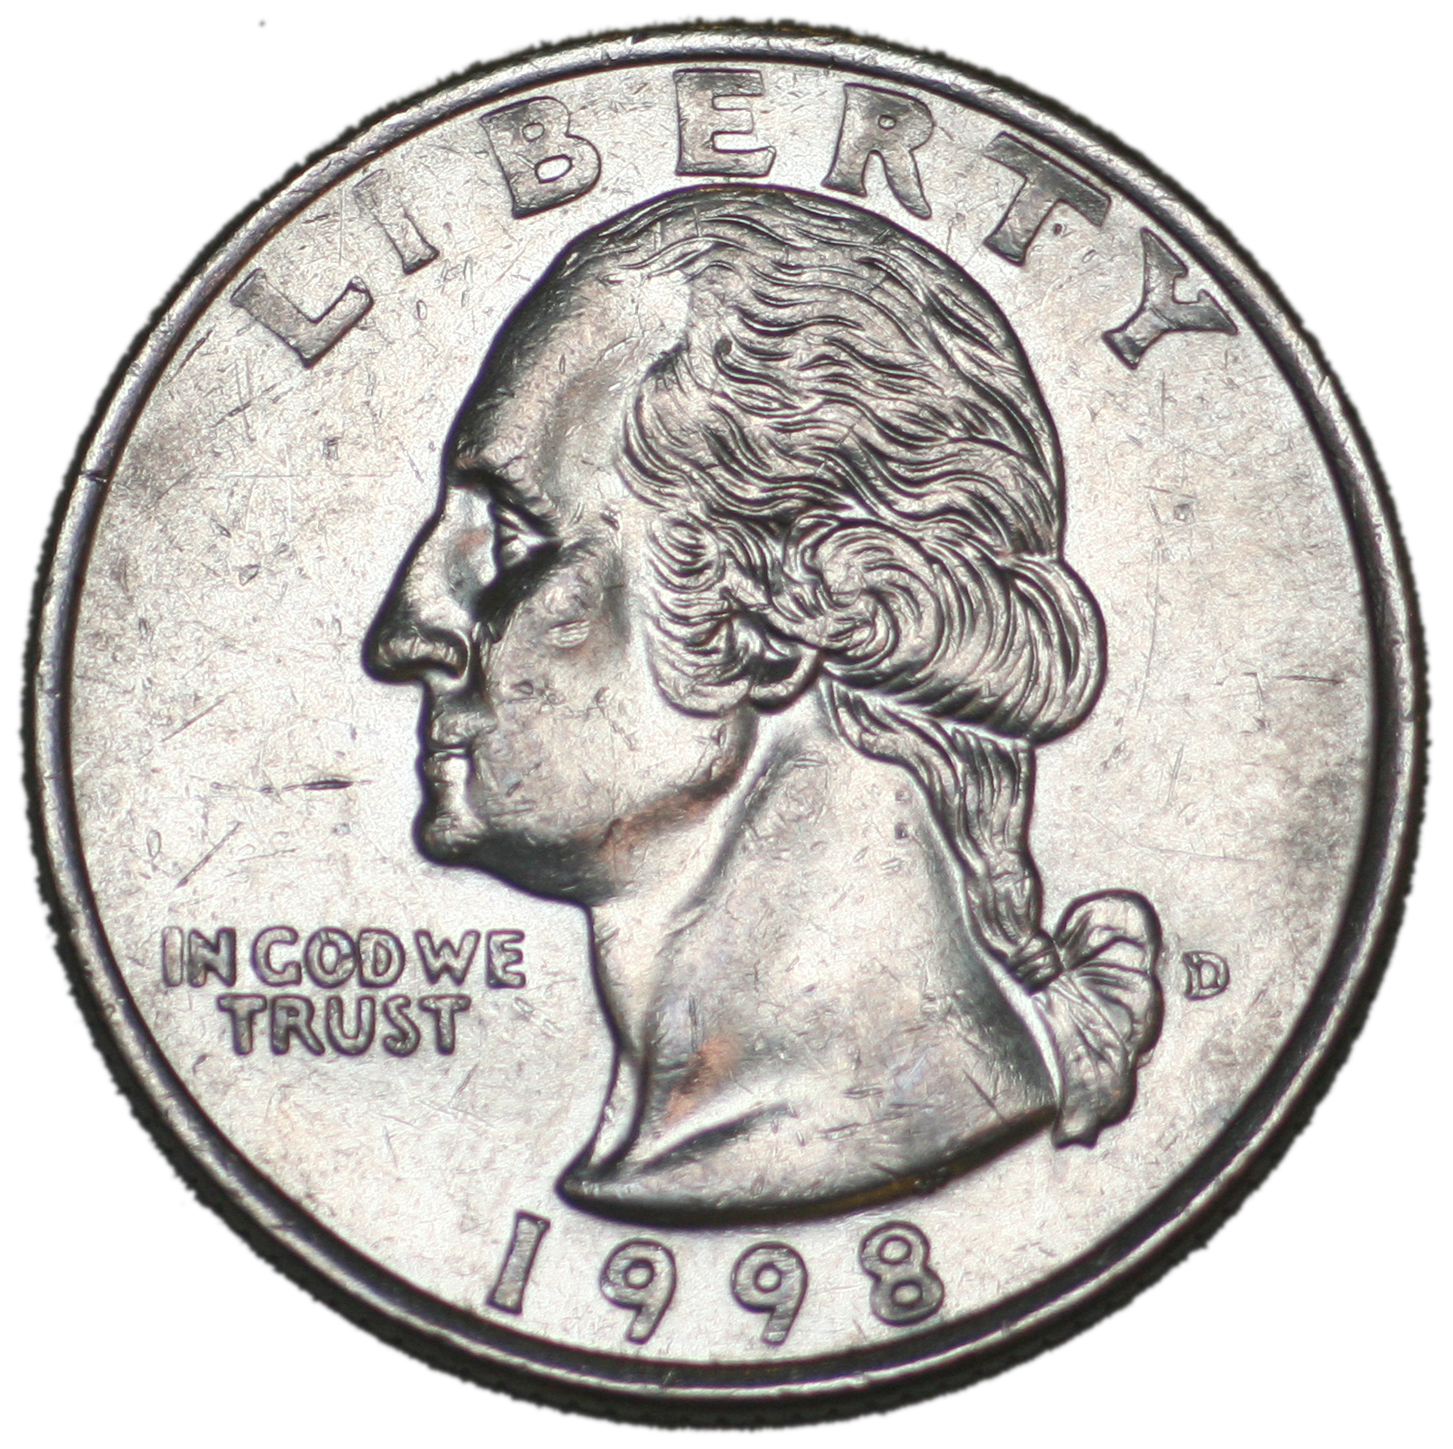 the coin shows a profile, and the head and shoulders